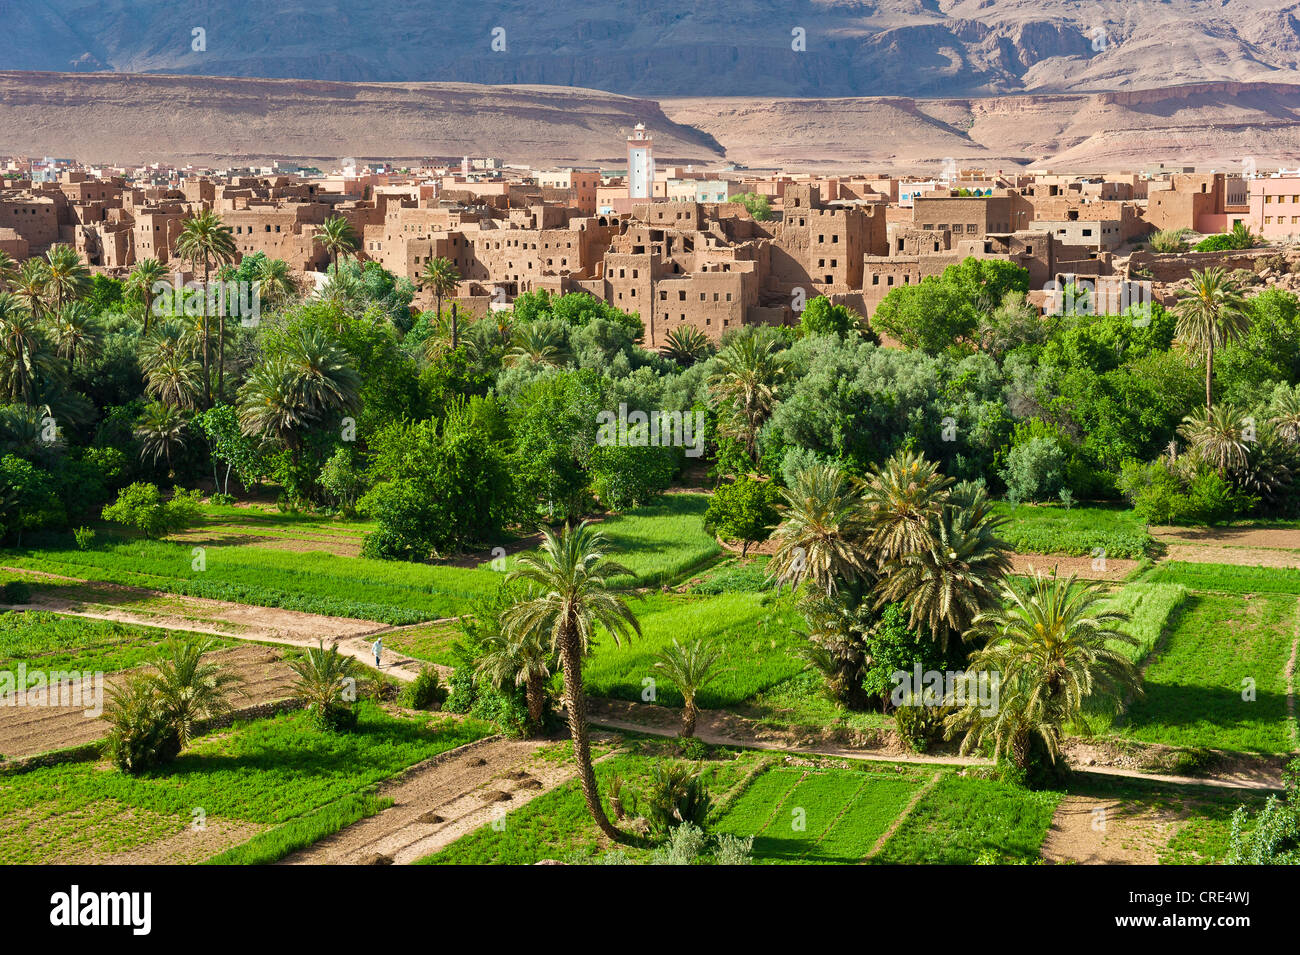 Oasis with fields, date palms and fruit trees, village of mud-walled houses at the back, Ksar Berber village with a mosque Stock Photo